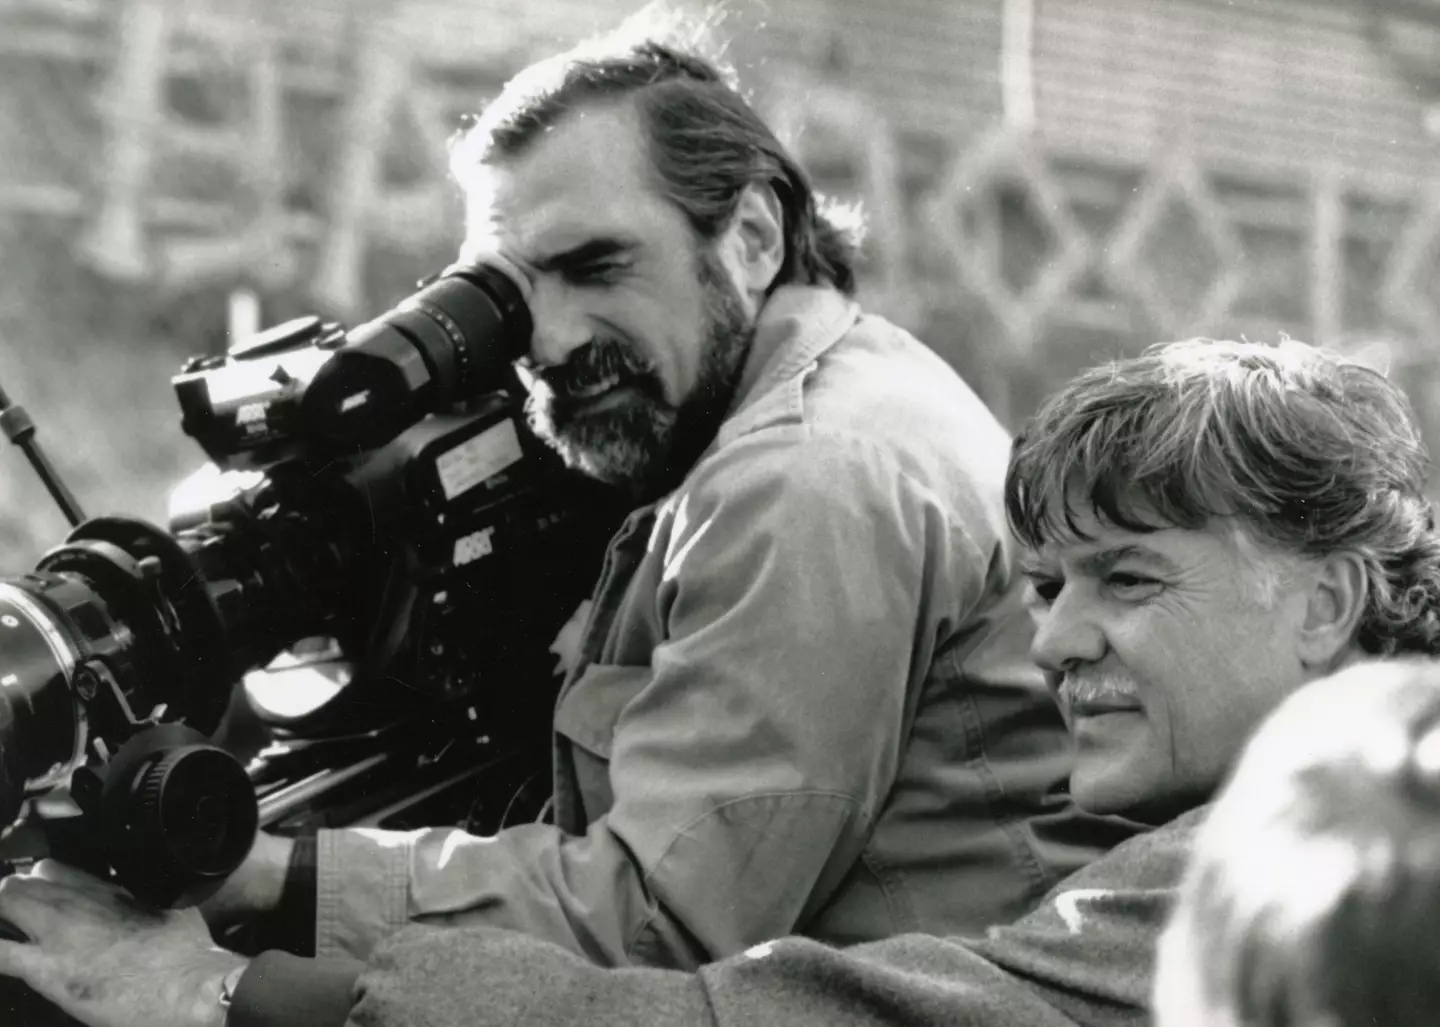 One of Scorsese’s first rules is that plot is secondary to his relationship with the actors in his films.